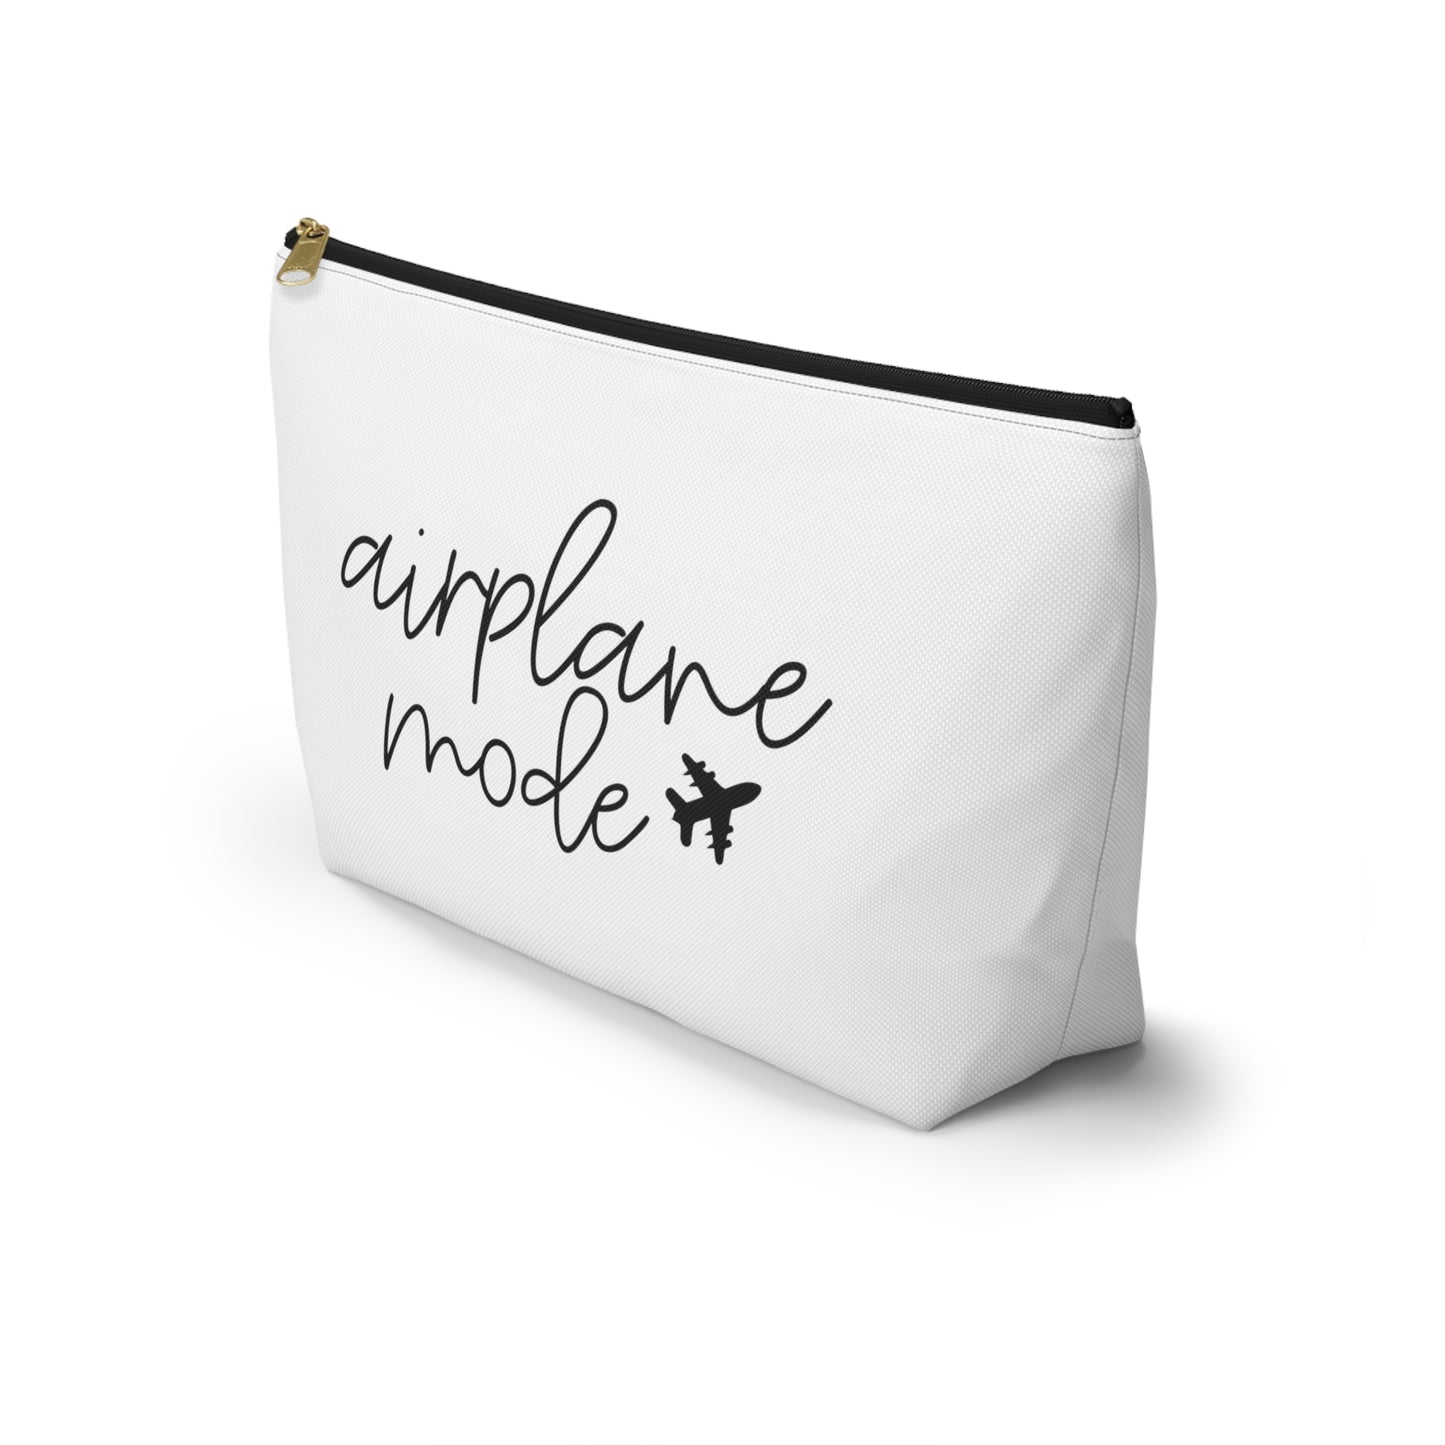 Airplane mode- Accessory Pouch w T-bottom